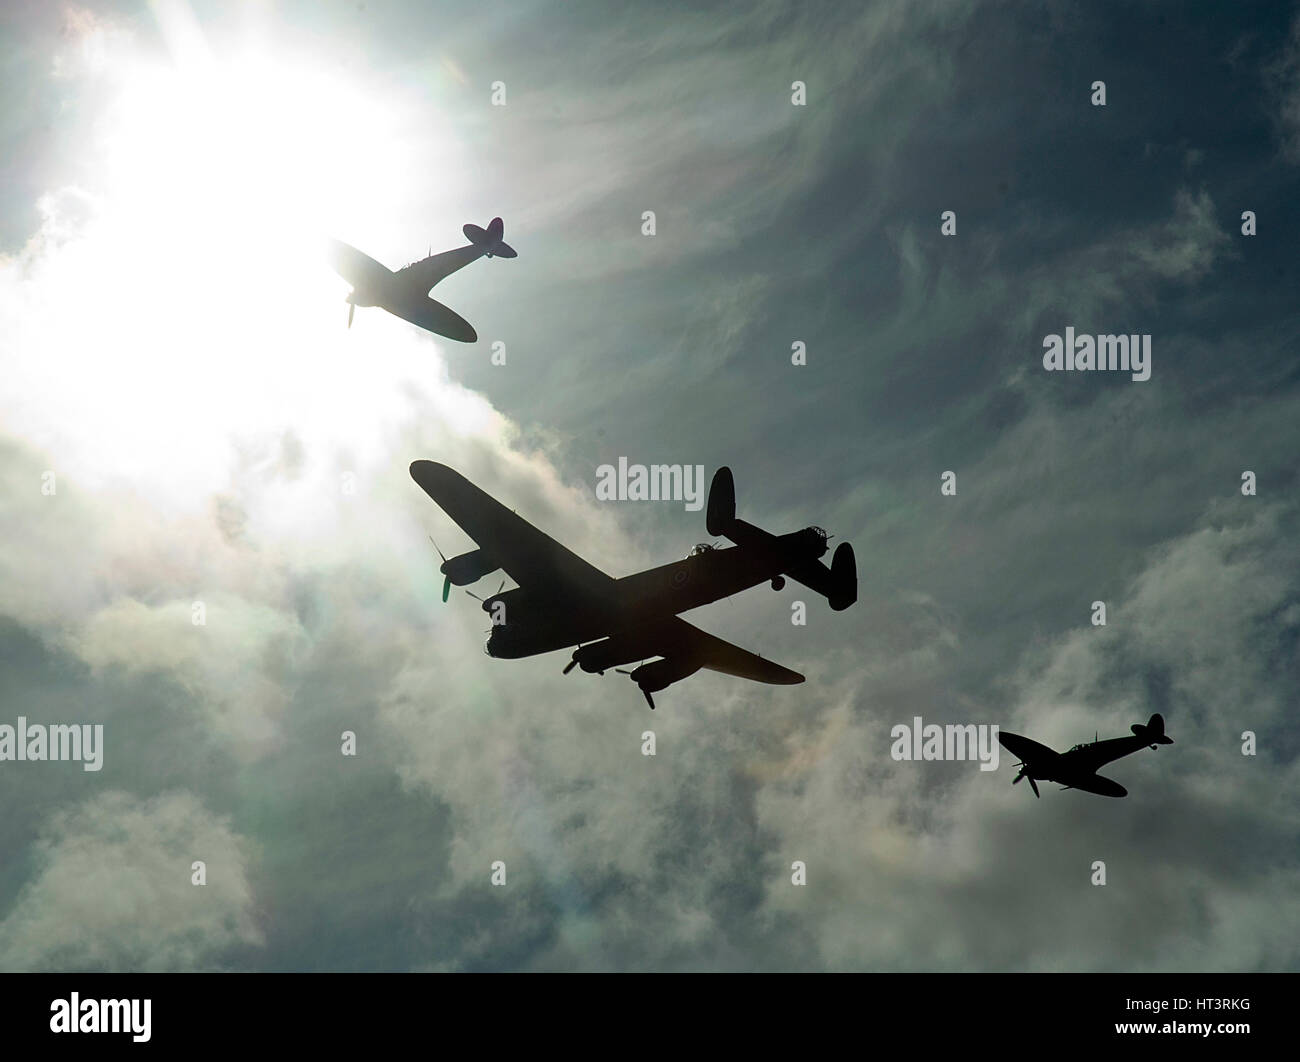 2011 Goodwood Revival Meeting, Lancaster bomber and 2 Spitfires in aerial display. Artist: Unknown. Stock Photo